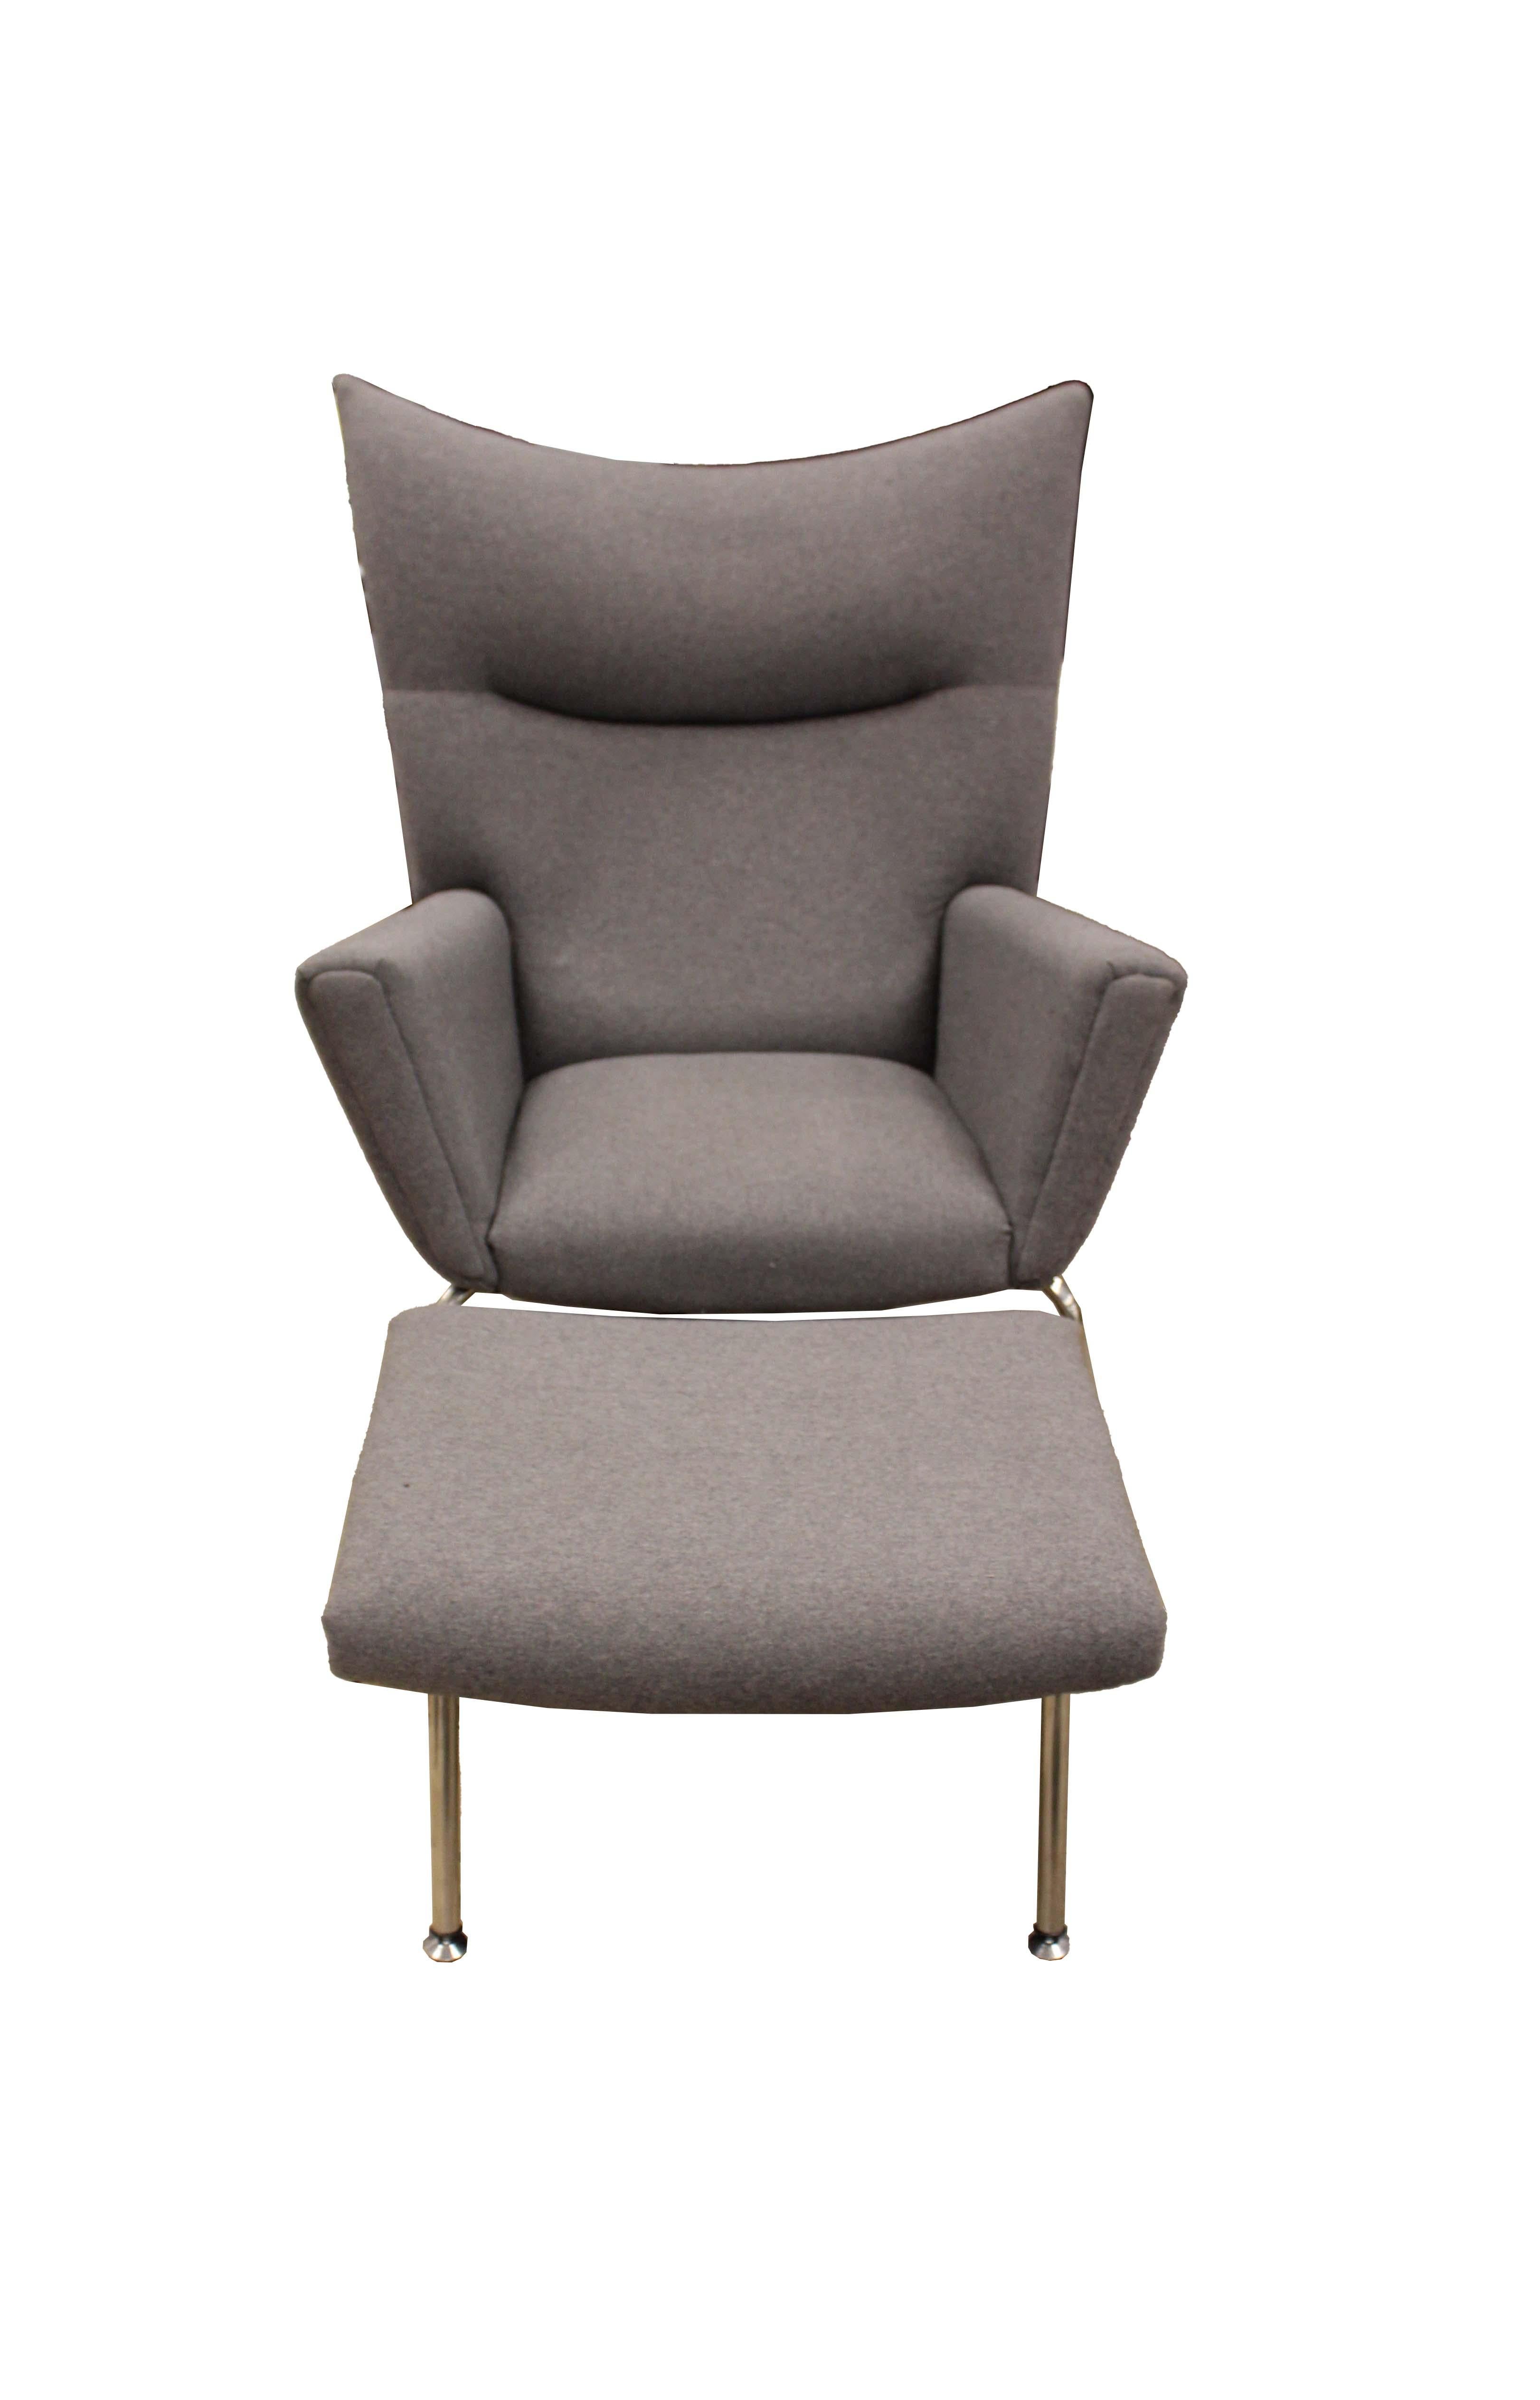 This Carl Hansen and Søn style chair up for consideration. The dramatization of the winged back gives this chair an incredible structural dynamic. The structure and texture of the chair in addition with the ottoman allows this chair to give a